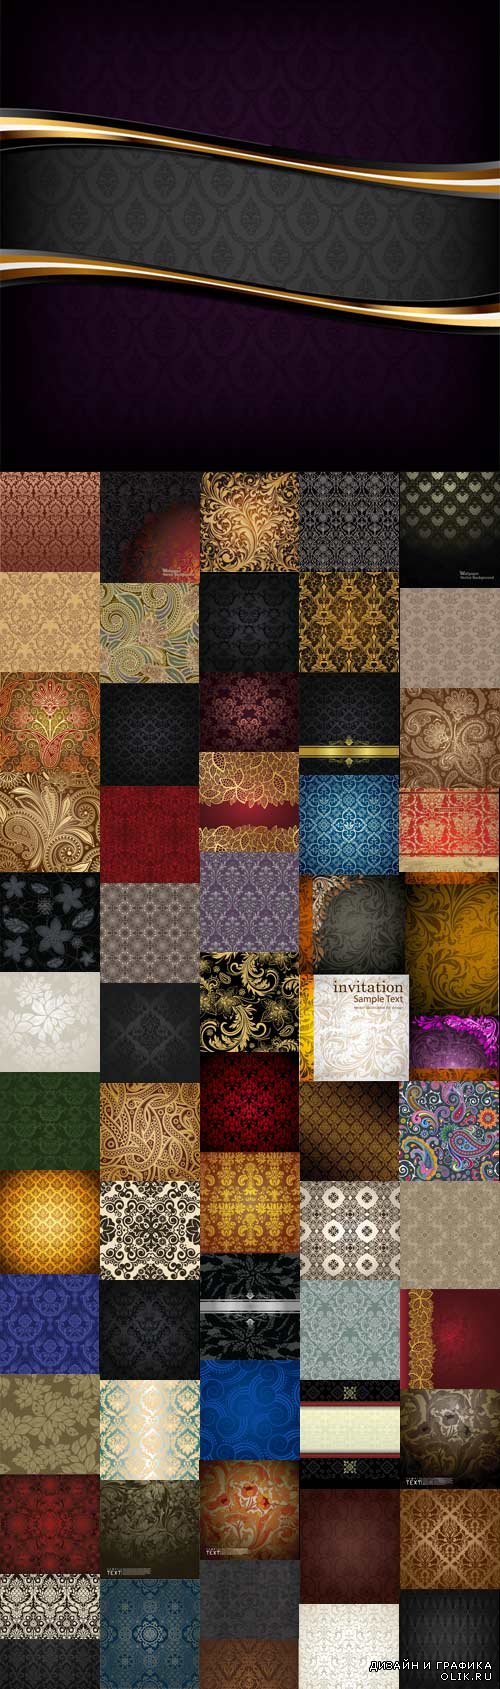 Awesome vintage vector backgrounds